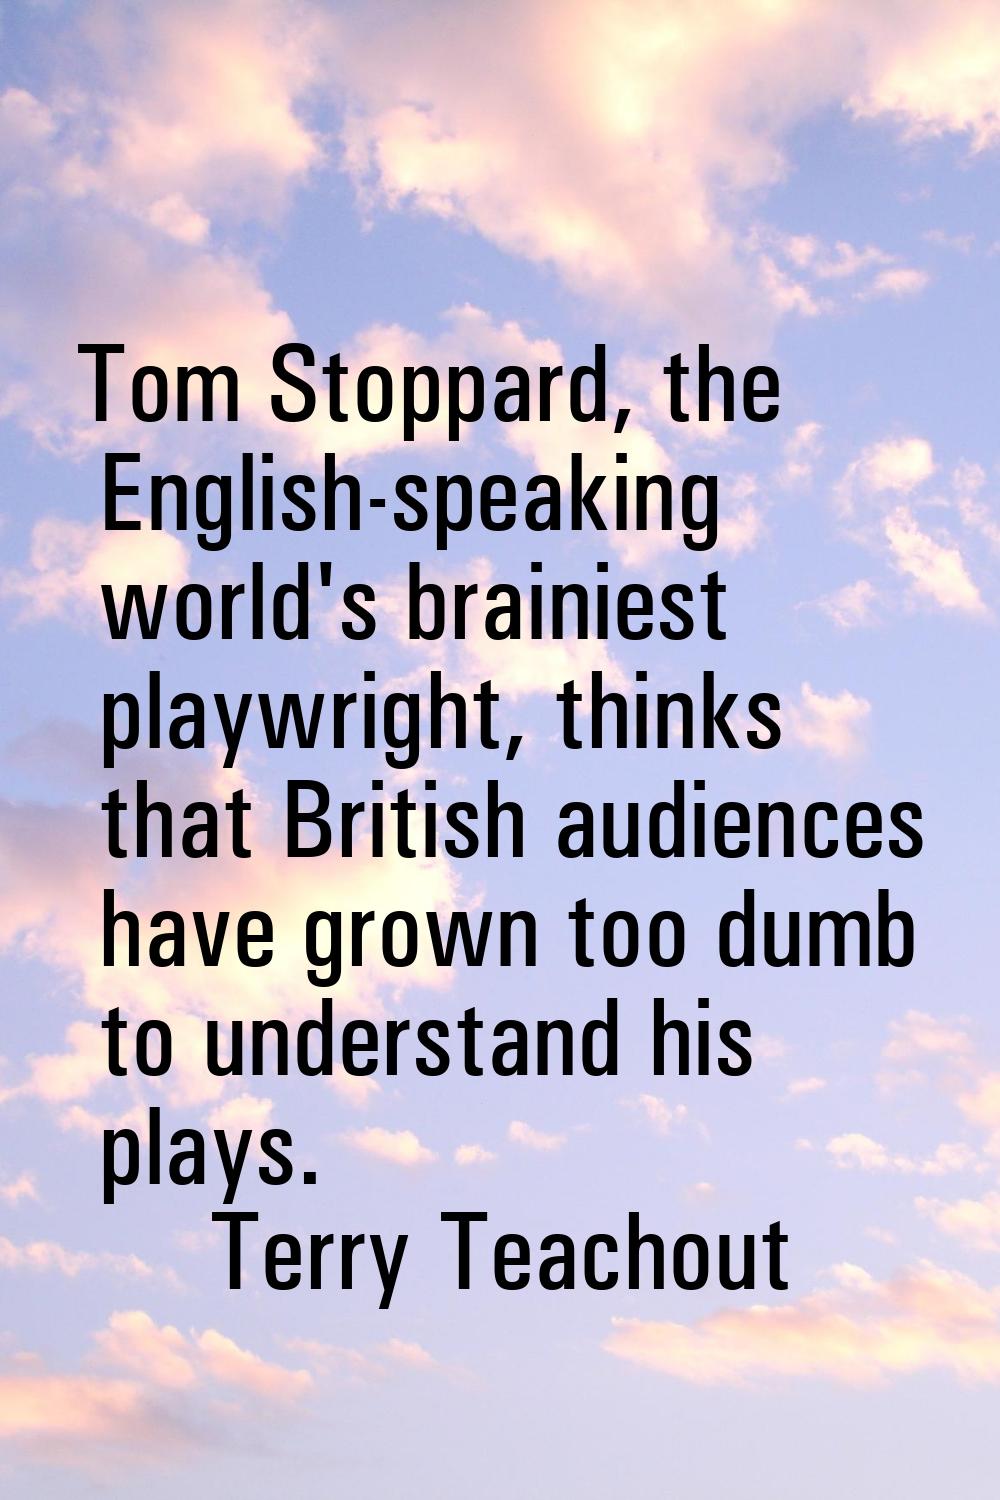 Tom Stoppard, the English-speaking world's brainiest playwright, thinks that British audiences have